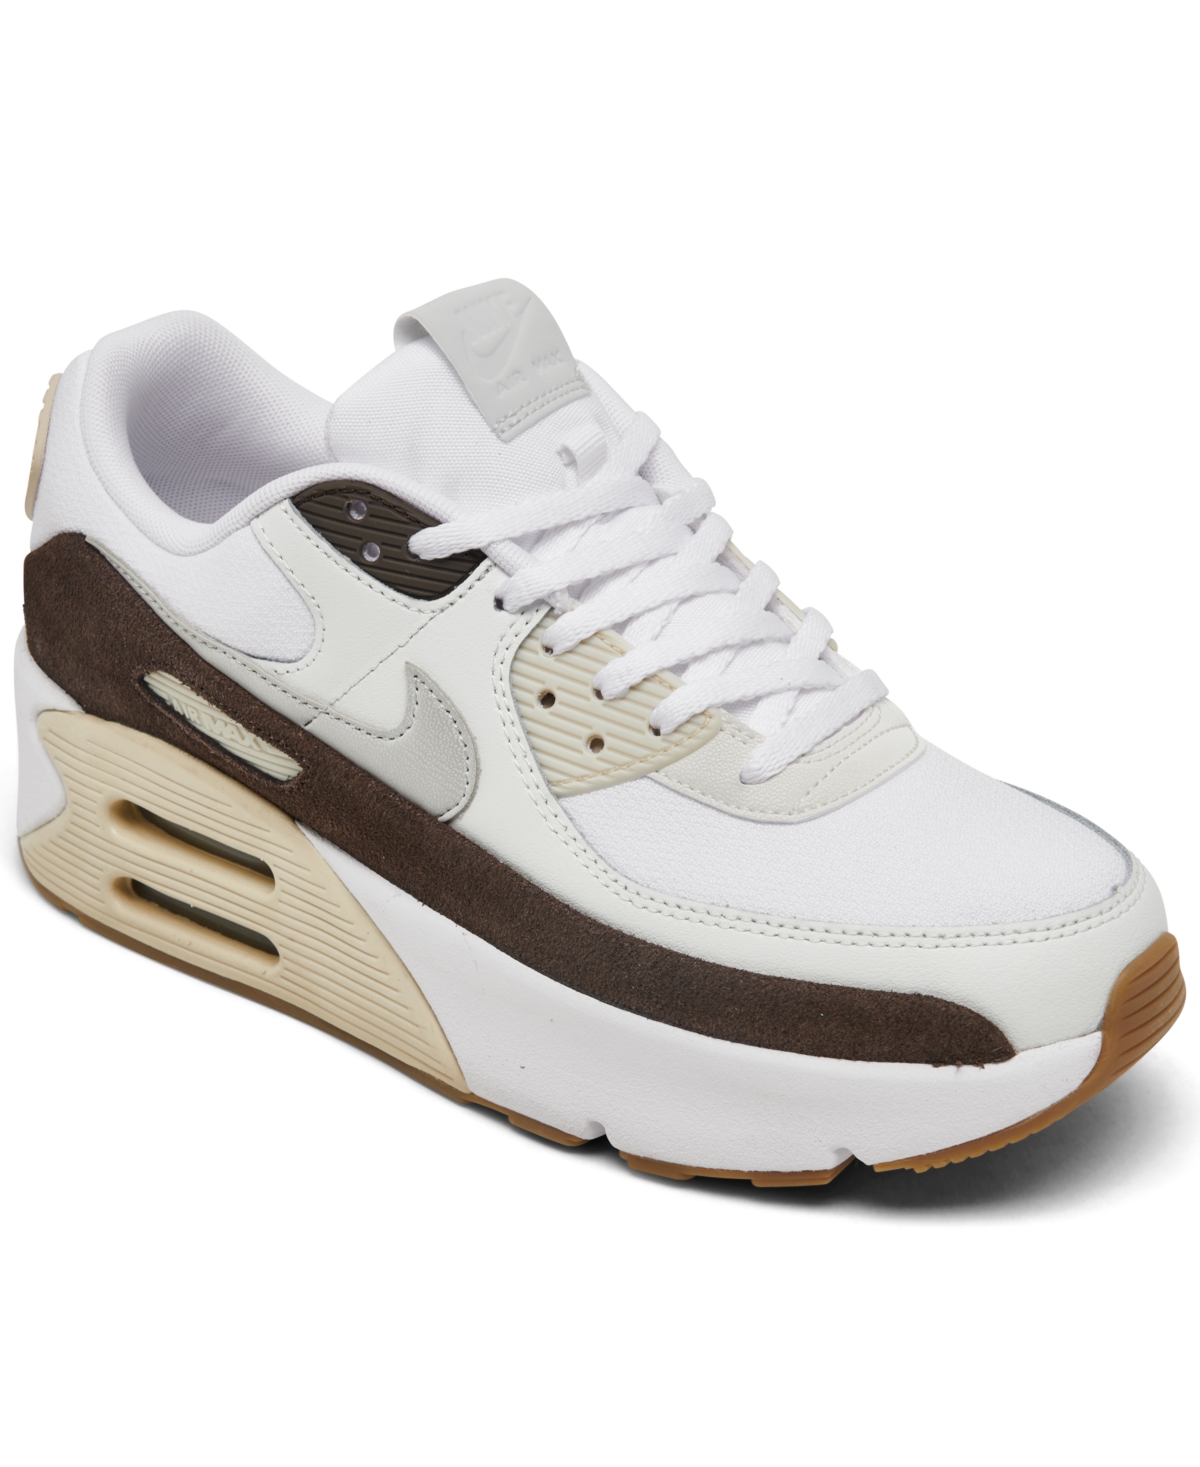 Women's Air Max LV8 Casual Sneakers from Finish Line - White/Photon Dust/Baroque